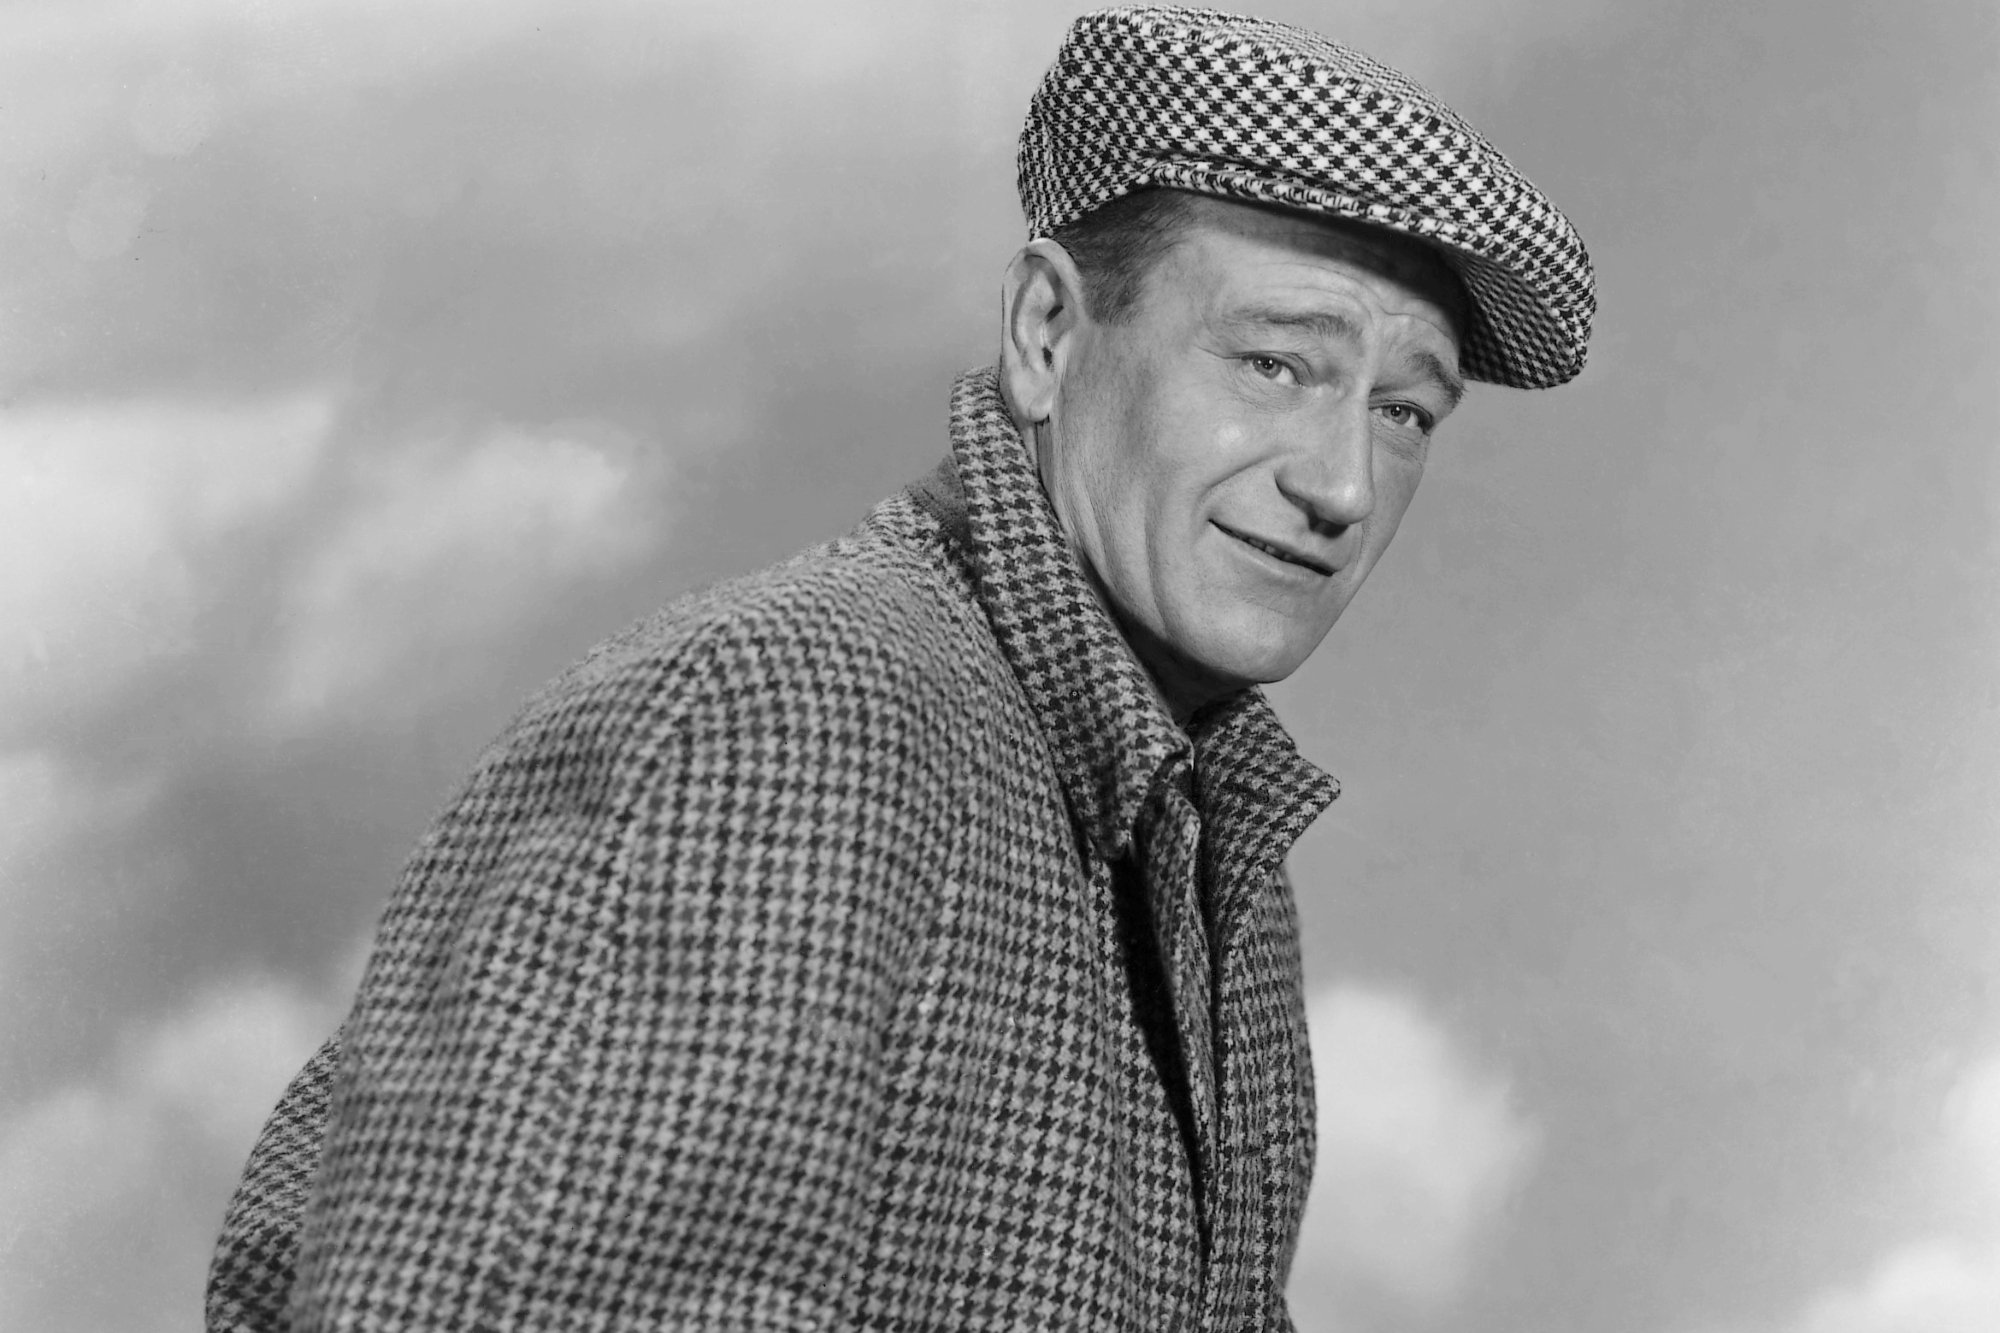 John Wayne, who had a favorite expression, wearing a checker-patterned coat and hat